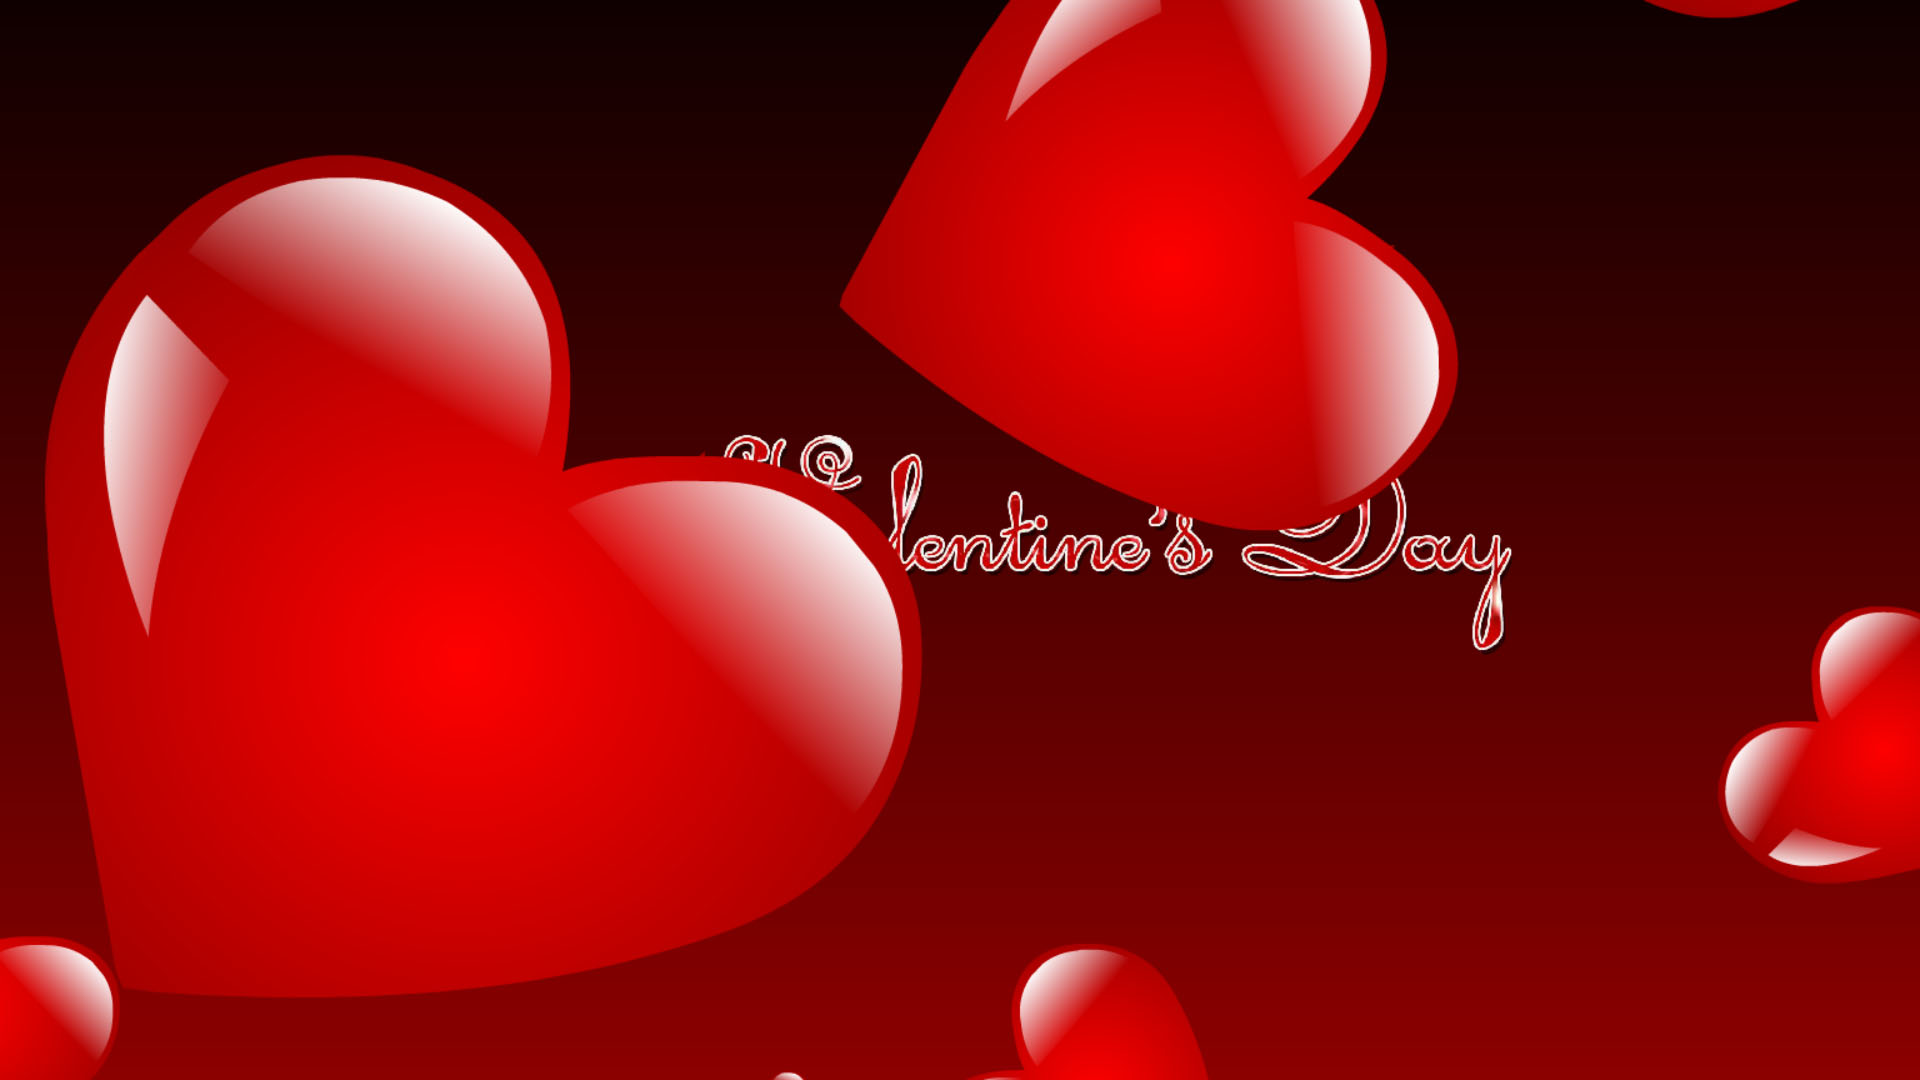 Will download free valentine screensavers absolutley free! 